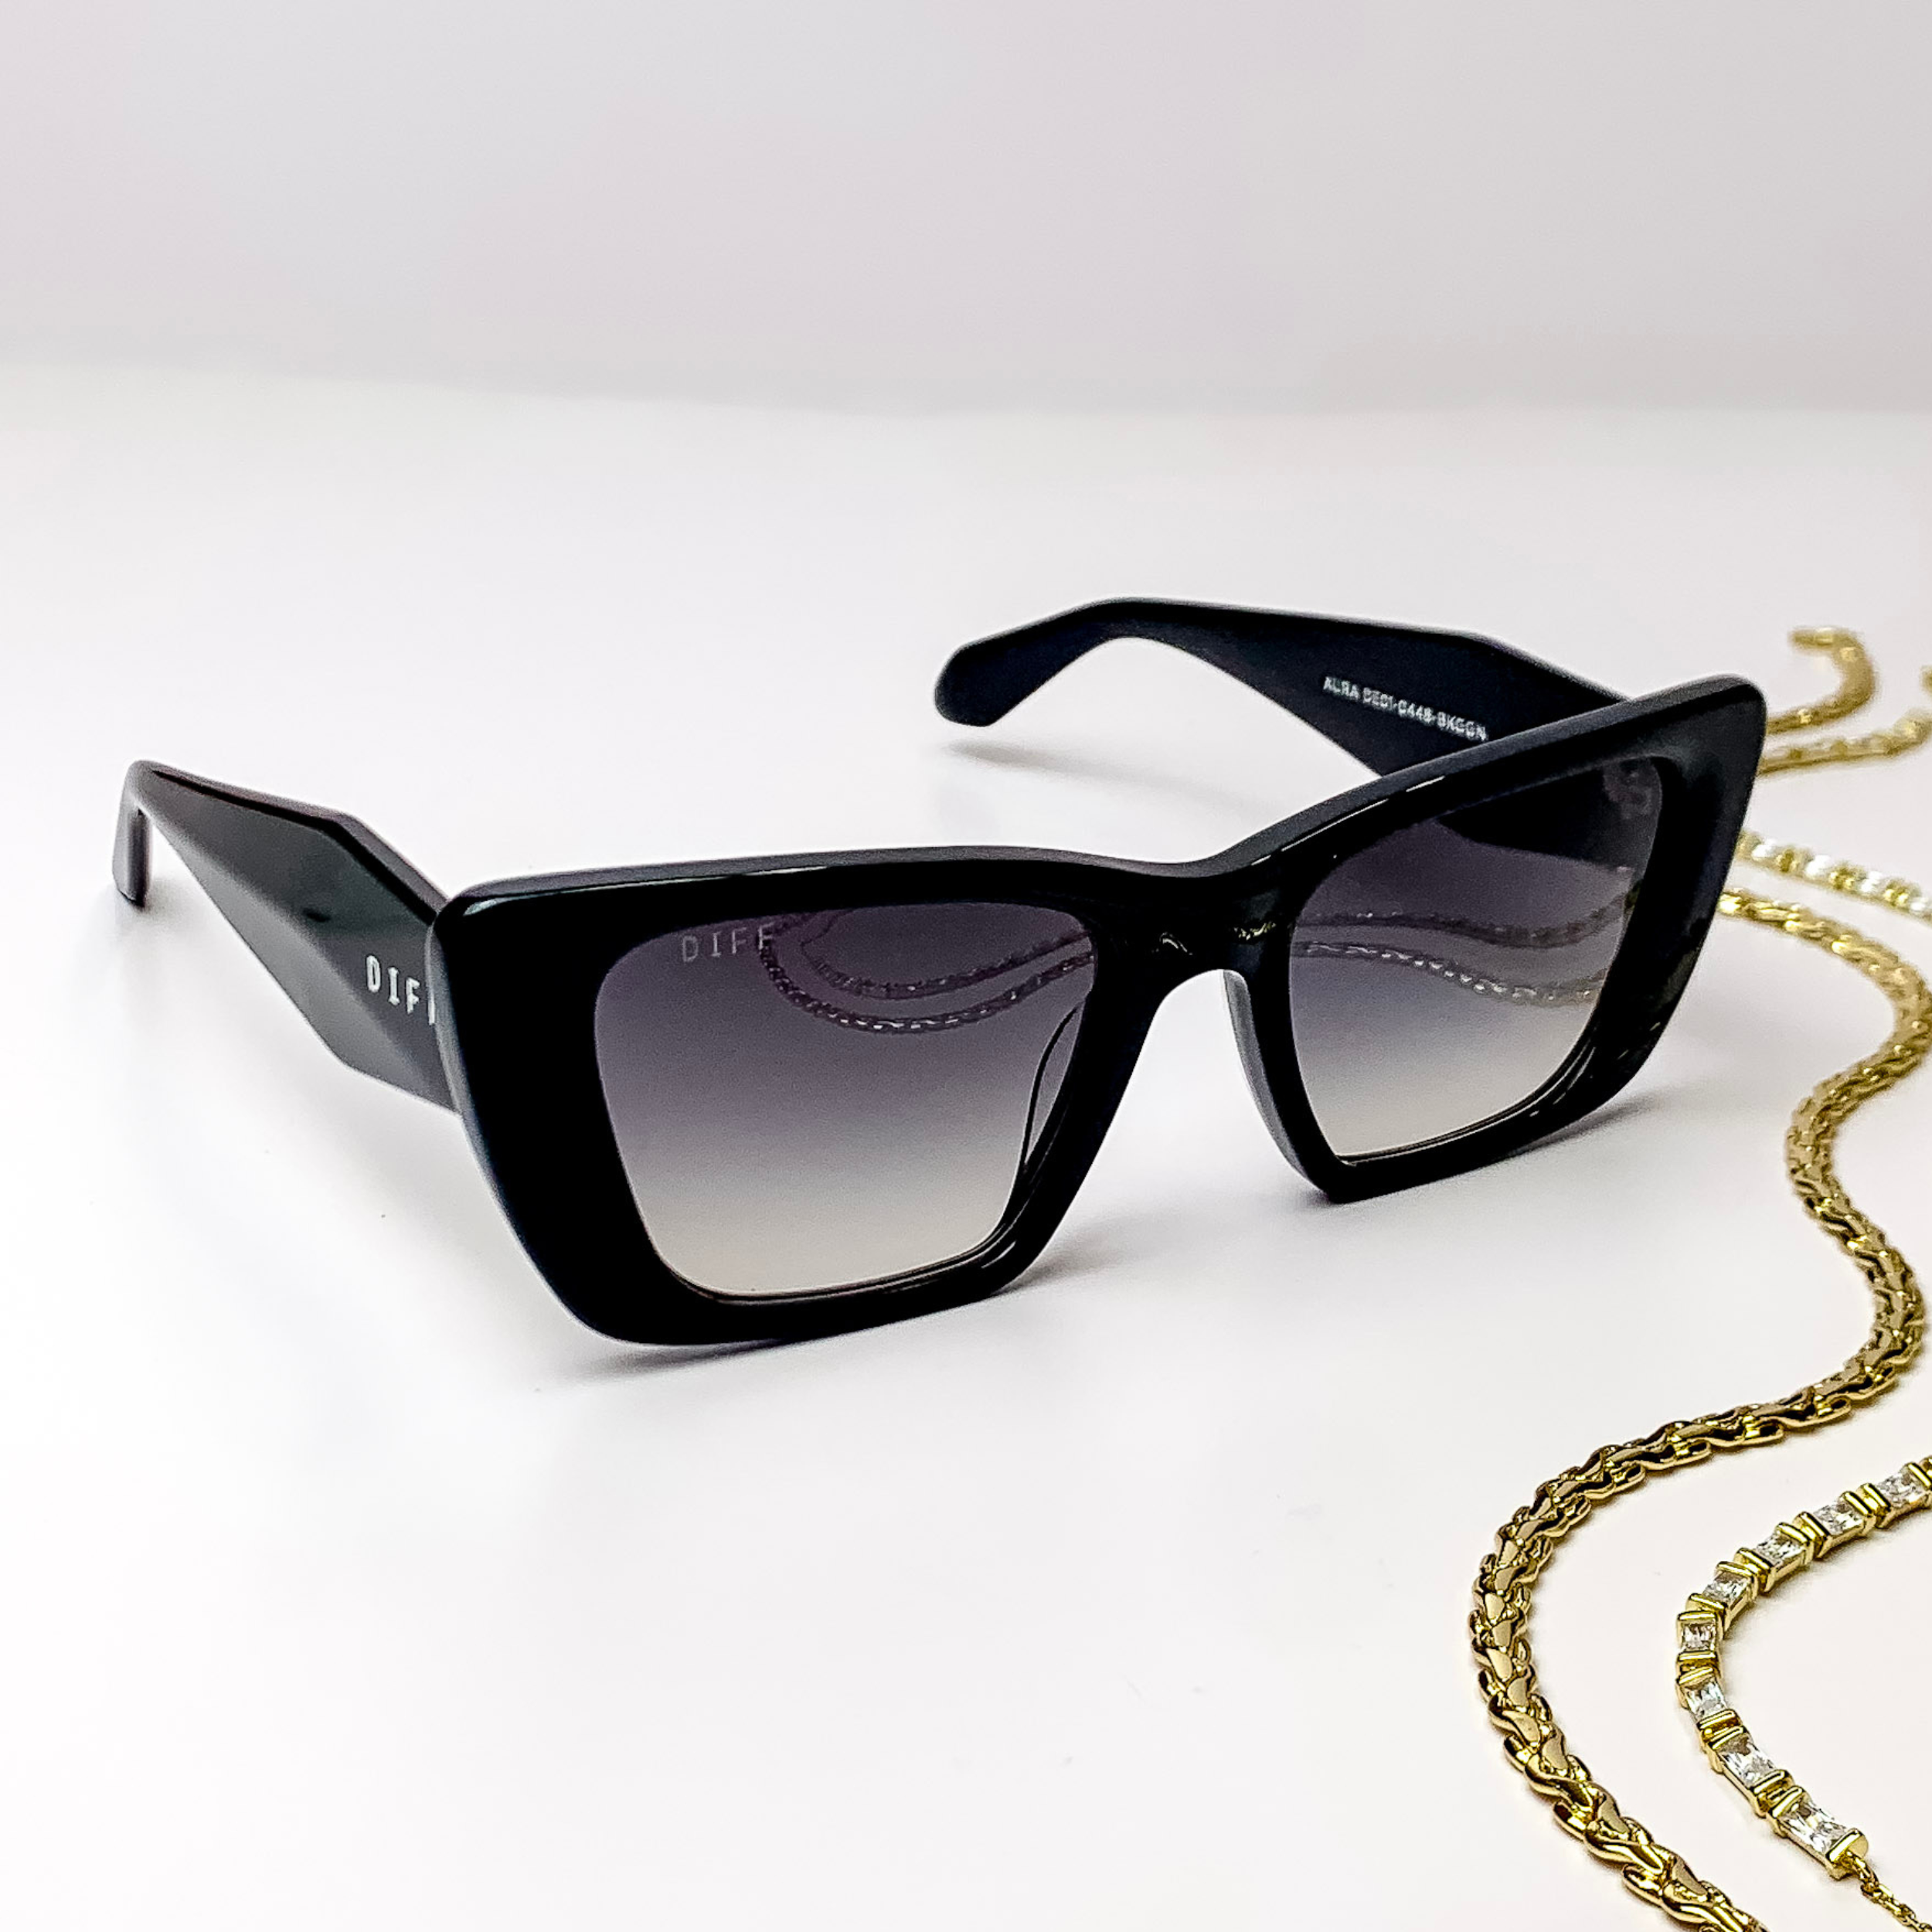 Square black cat eye glasses with a thick frame, thick temple, and grey gradient lenses